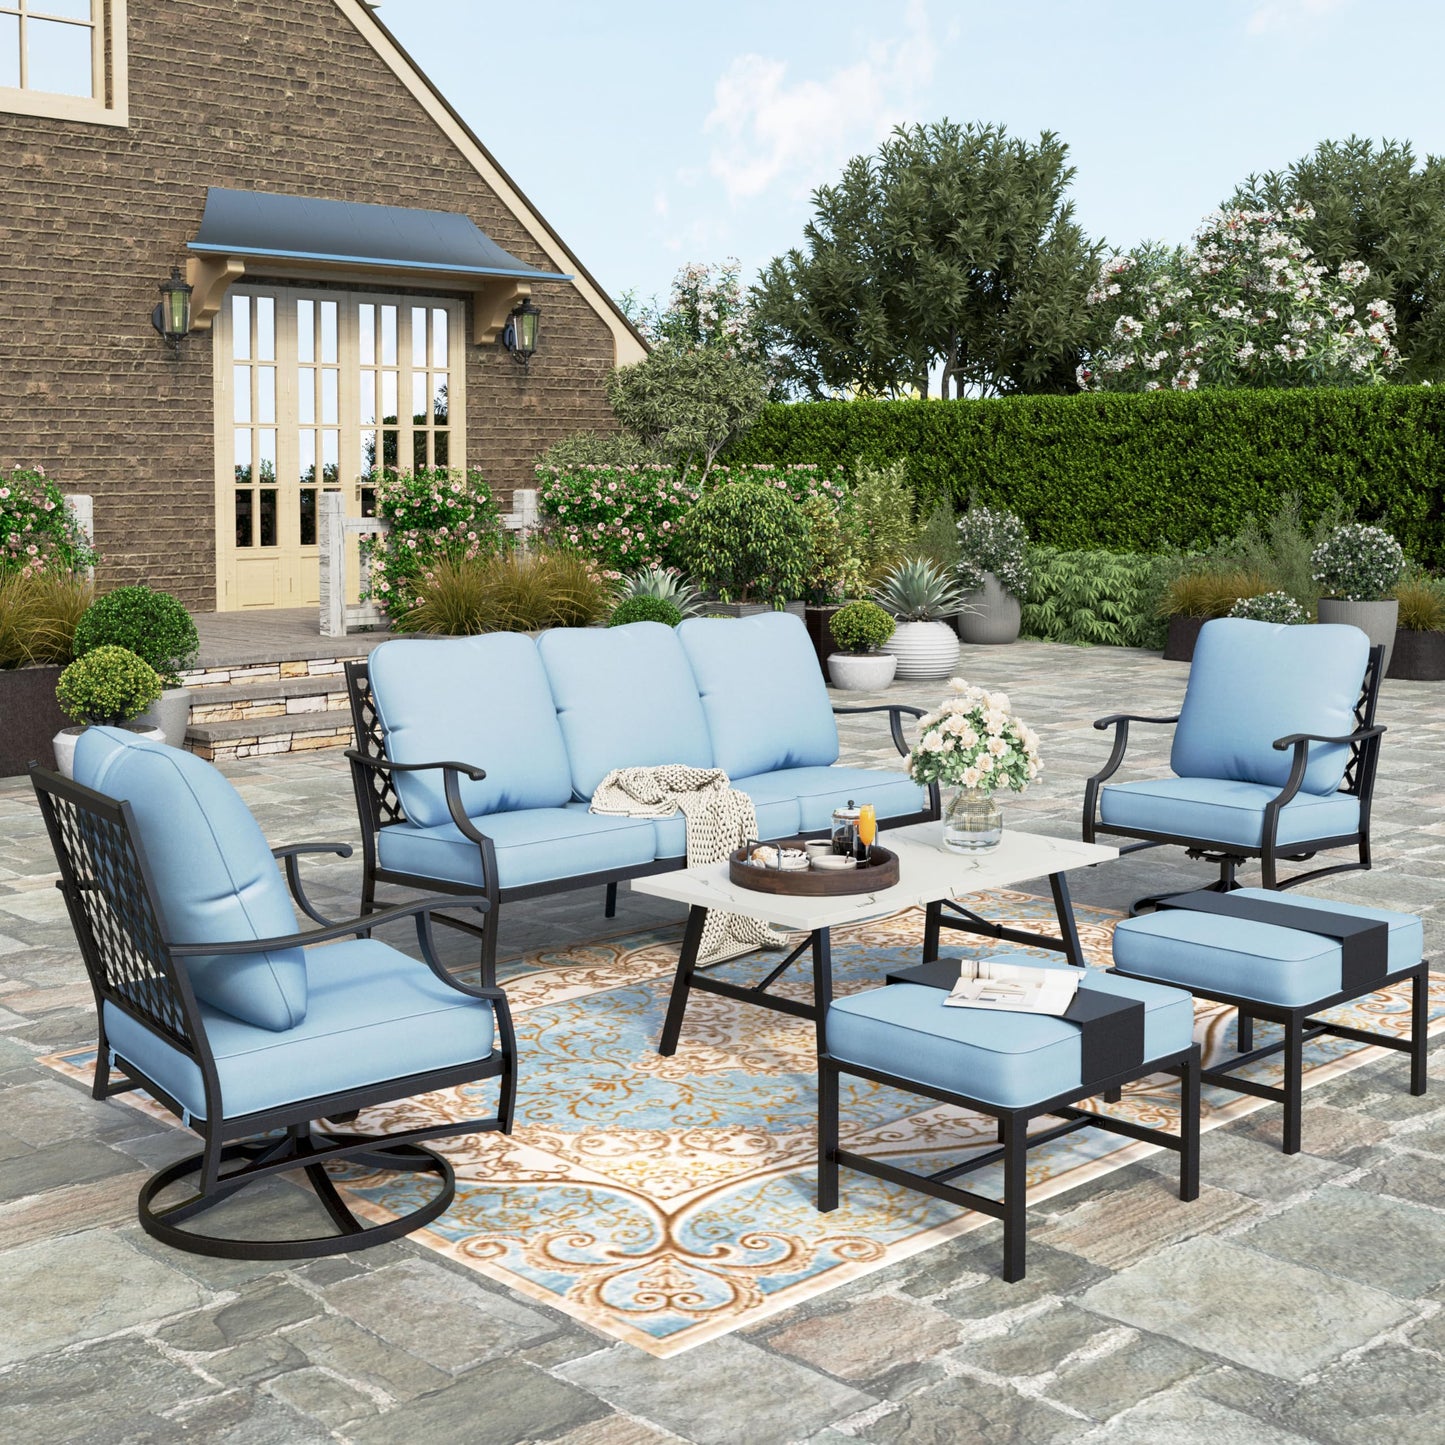 HERA'S HOUSE 6 Piece Patio Furniture Set, 2 x Swivel Cushioned Chair, 2 x Cushioned Ottoman, 1 x 3-Seat Sofa with Marbling Coffee Table, Outdoor Conversation Set for Lawn Garden Backyard, Blue